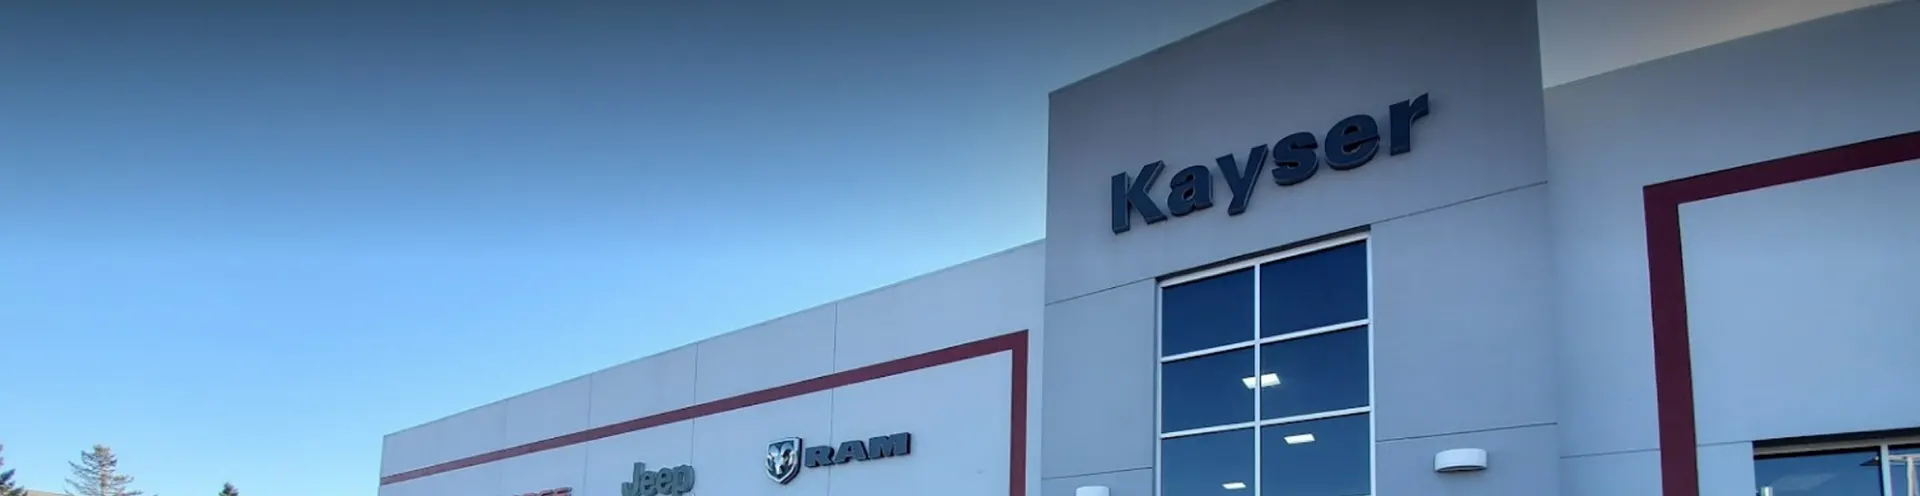 An image of the Kayser Chrysler Center Dealership's entrance and sign.